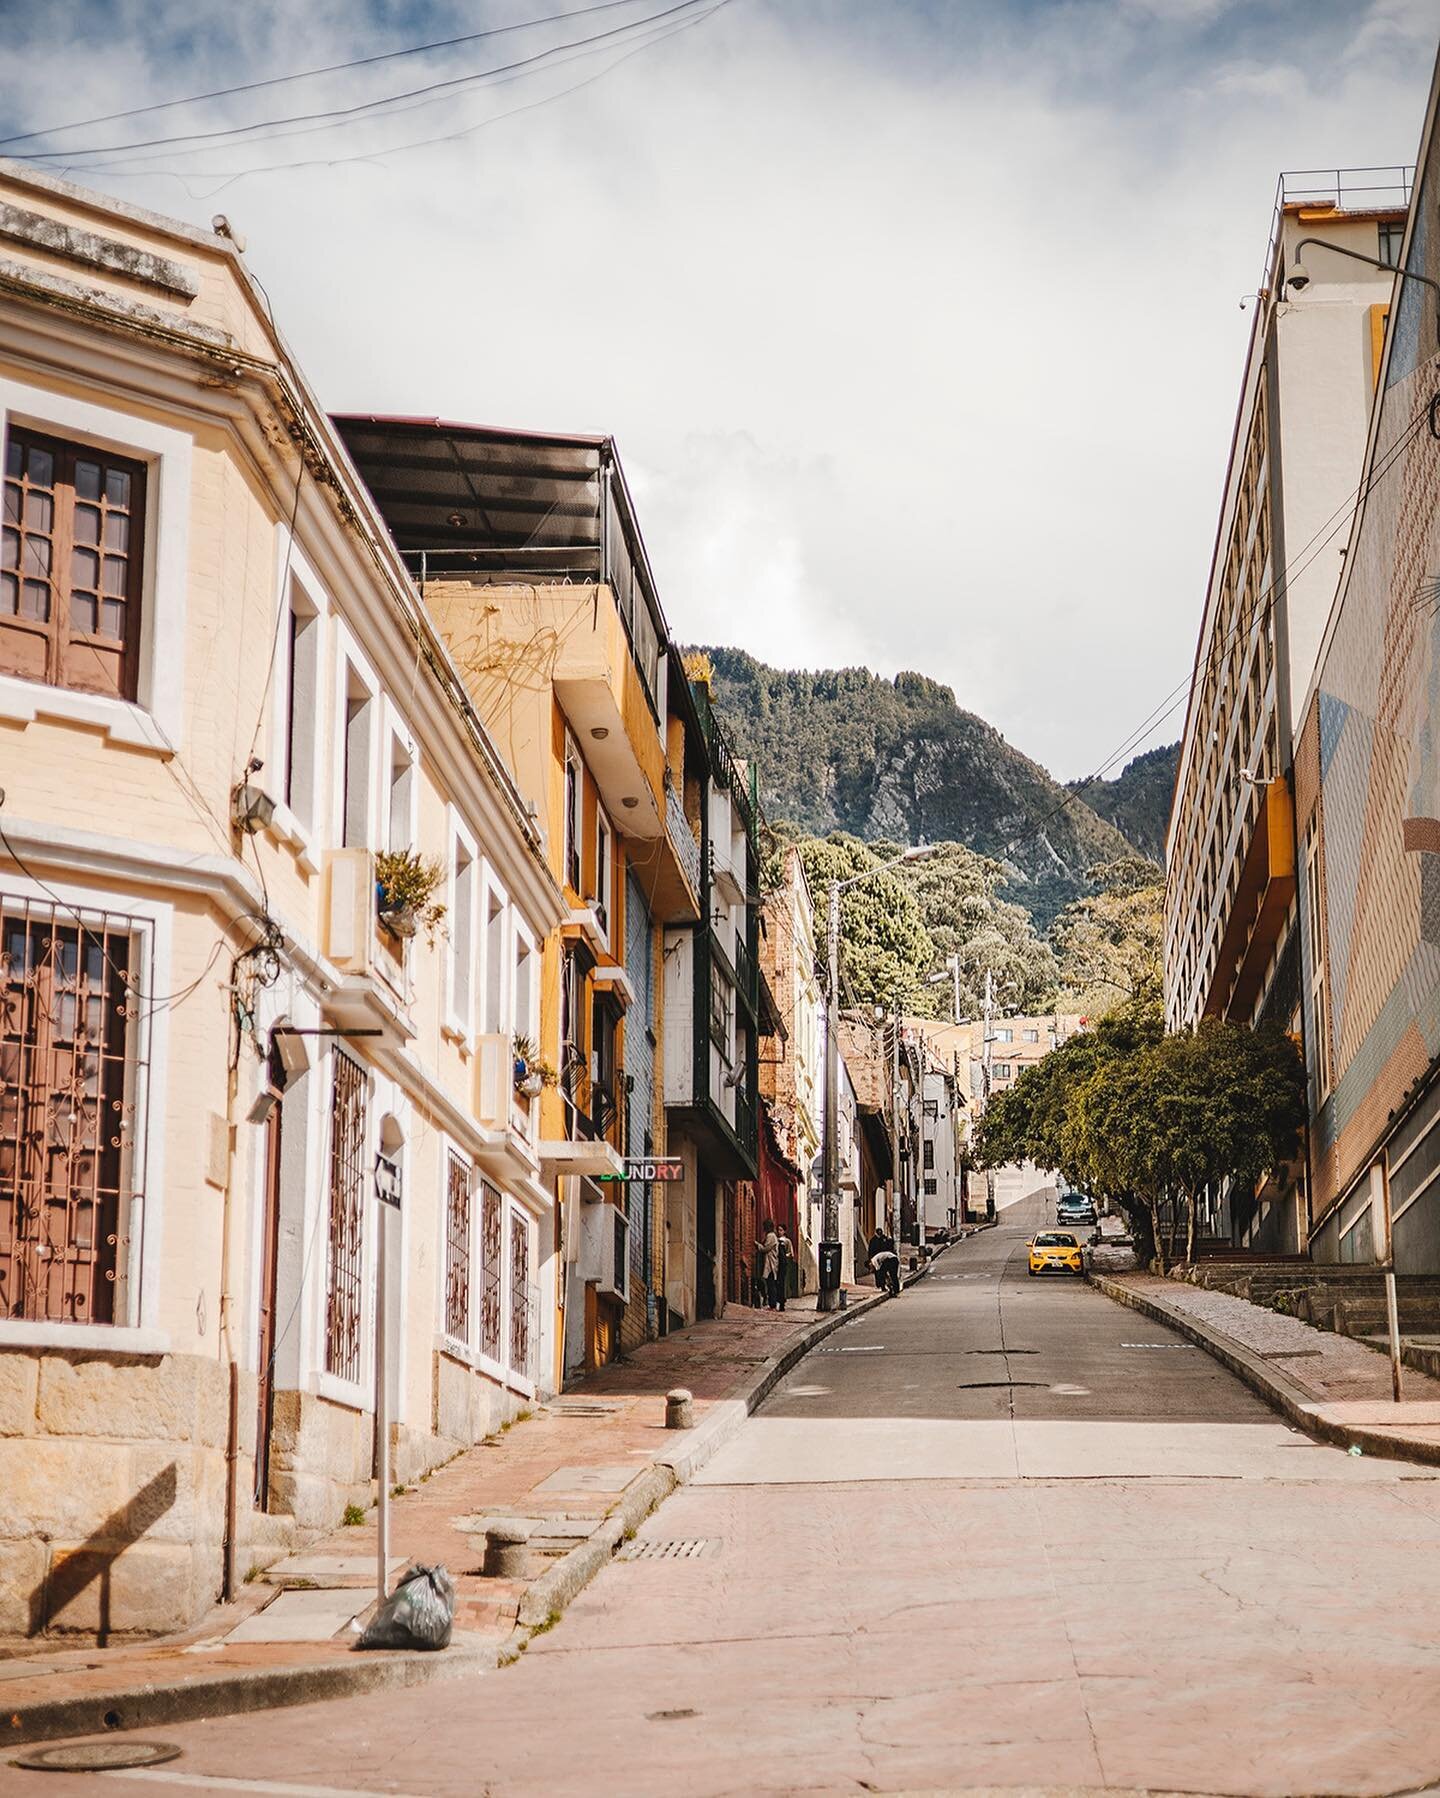 The metropolis of Bogota is located in the middle of a green mountain landscape. But if you descend into the small streets of the historic center, you will see that despite its size, the city also has a cozy vibe. 🌿